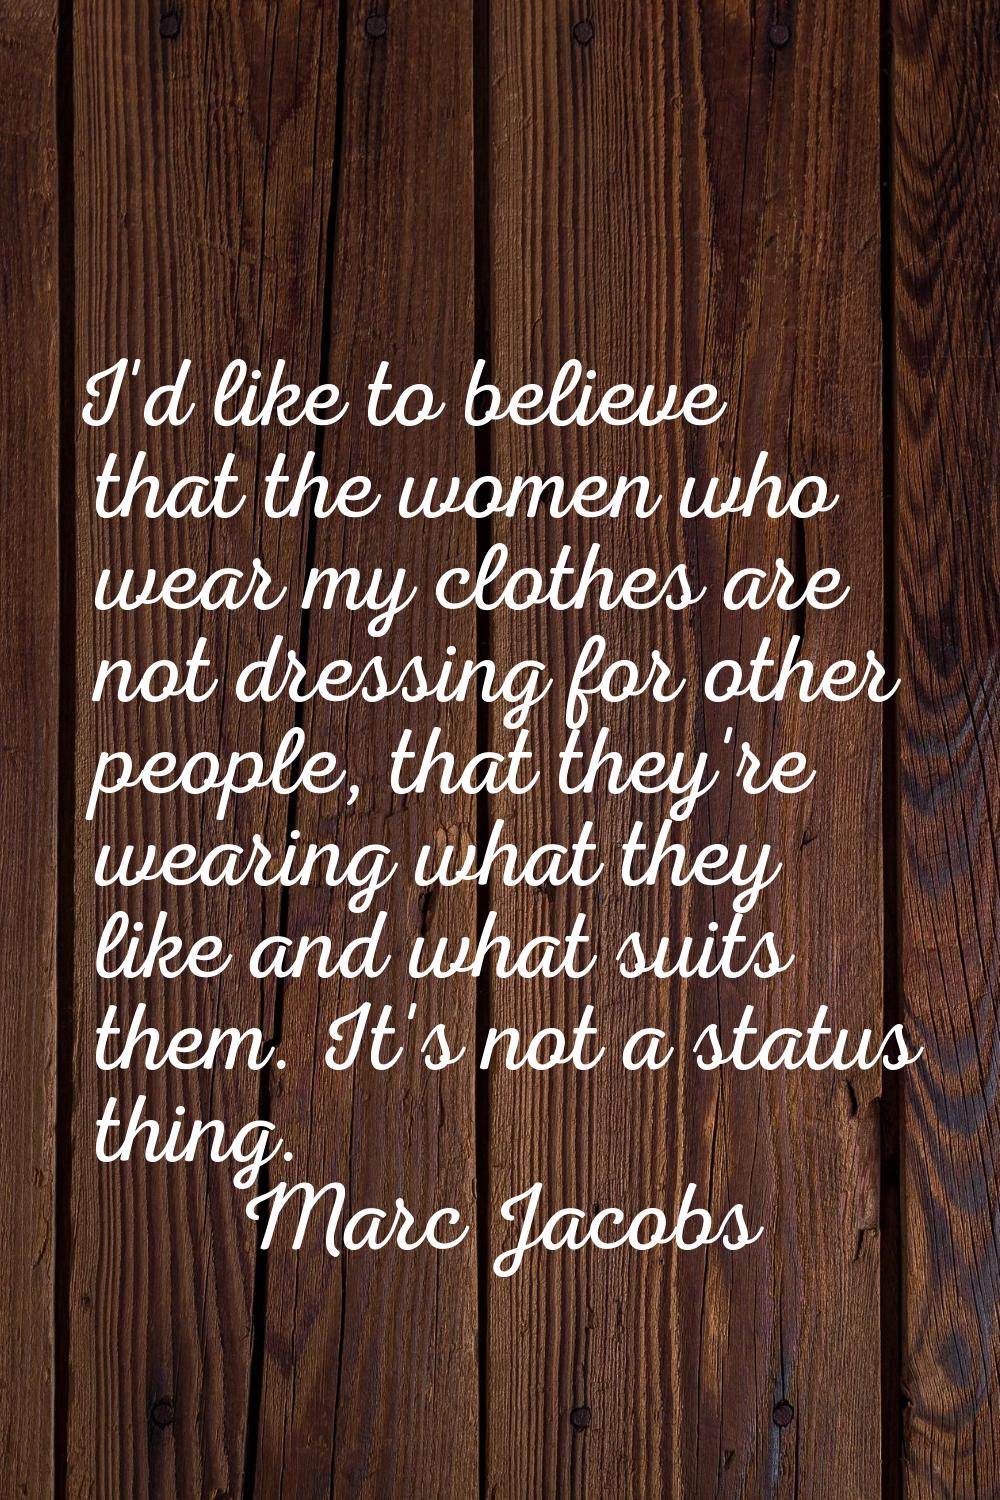 I'd like to believe that the women who wear my clothes are not dressing for other people, that they